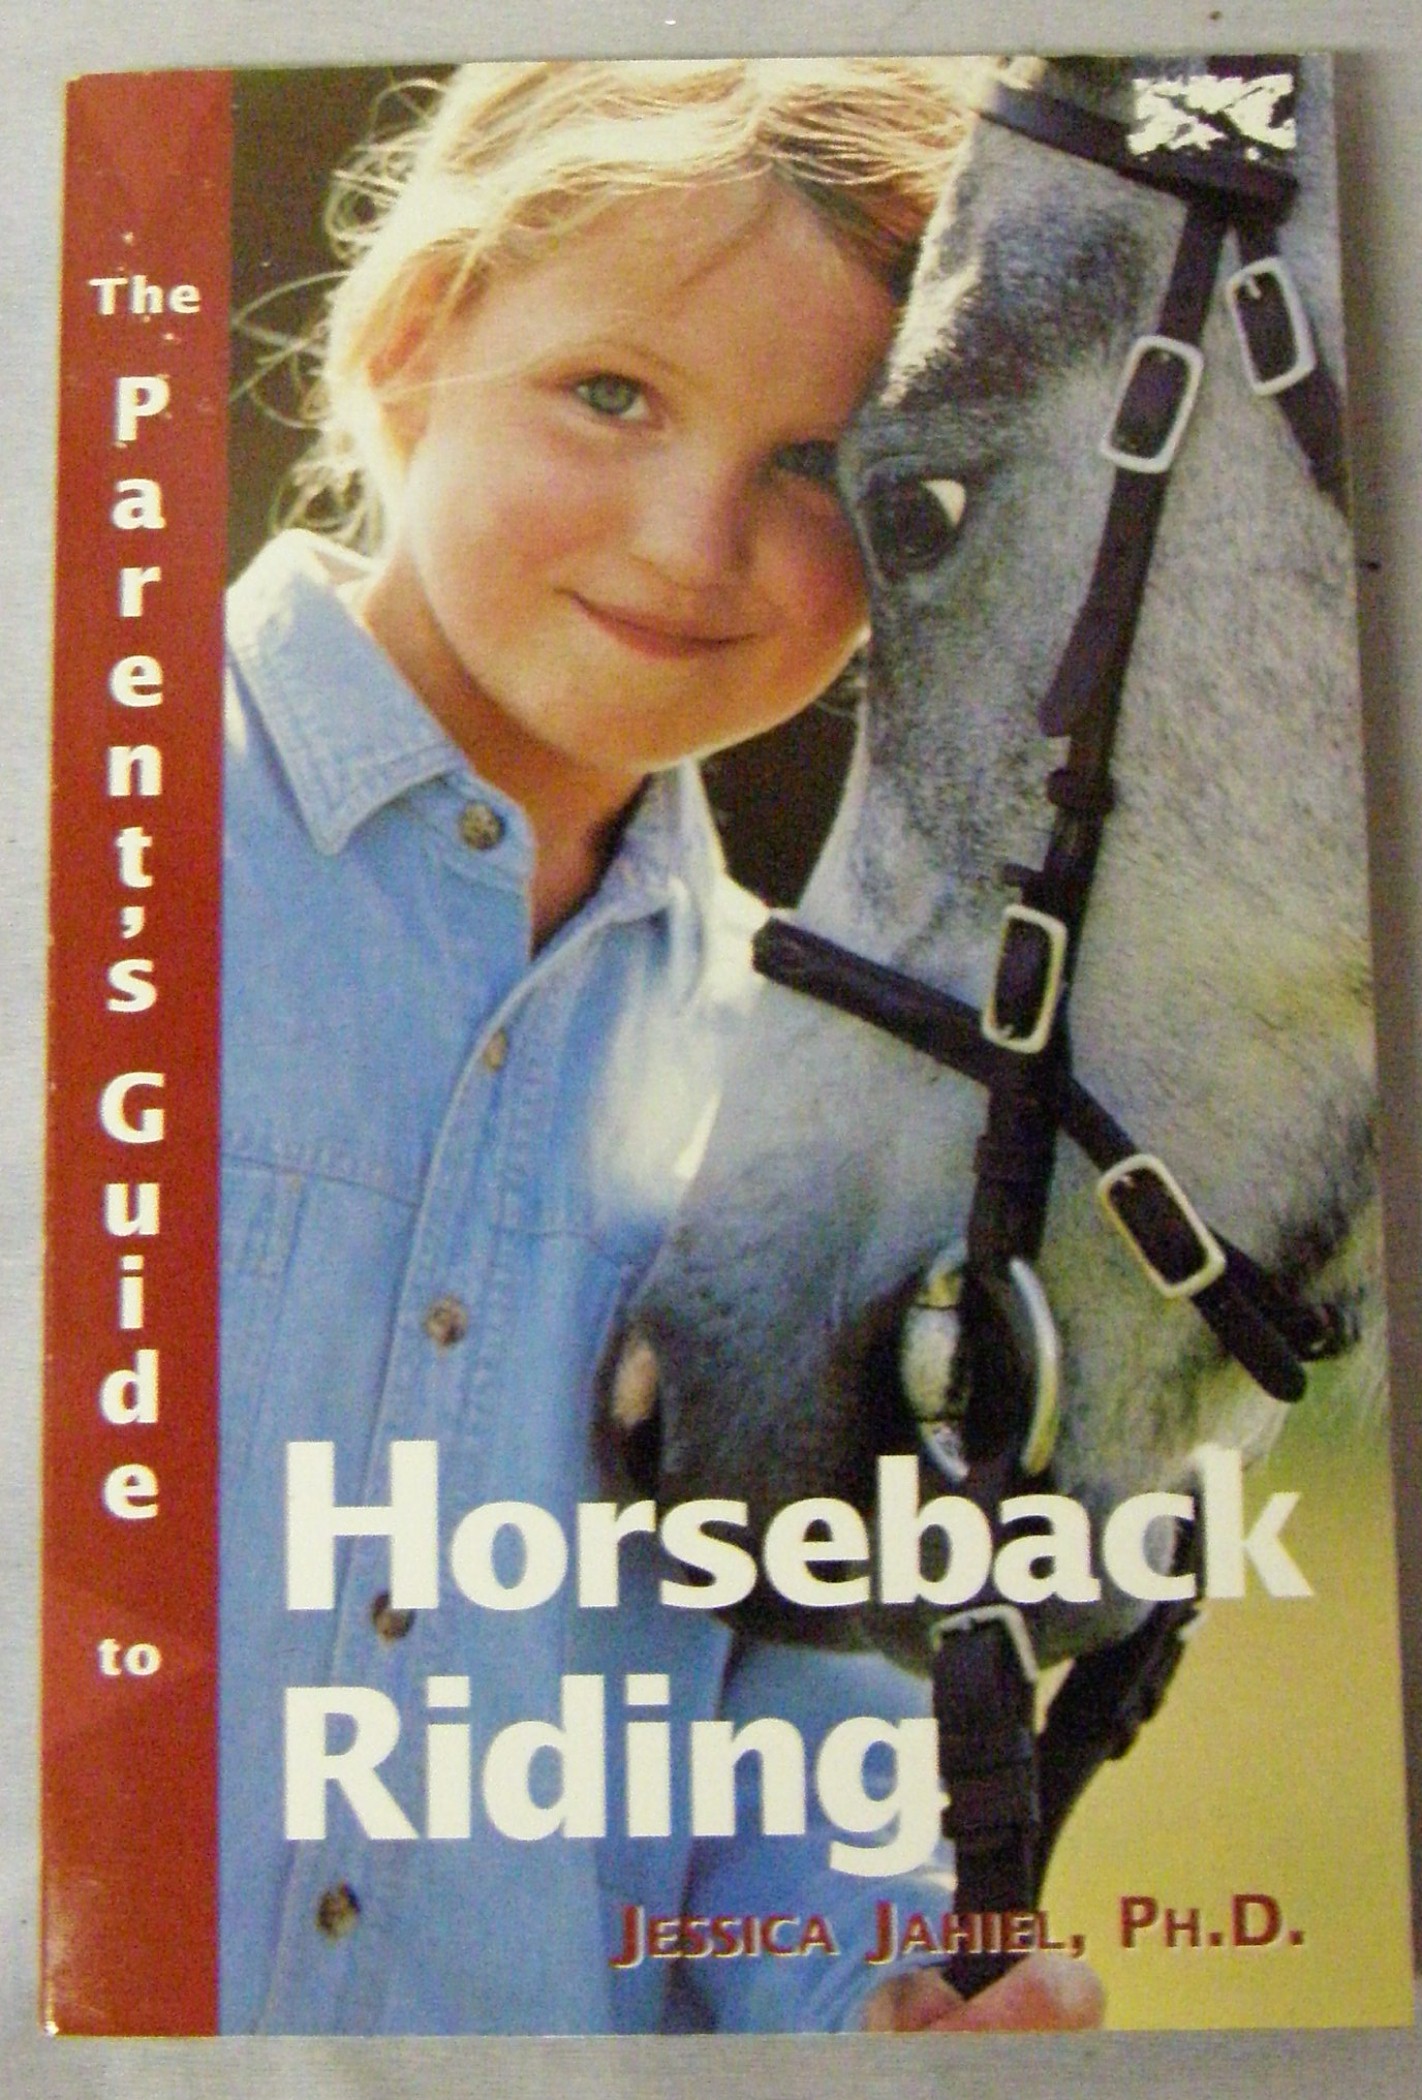 The Parents Guide To Horseback Riding Book By Jessica Jahiel, Ph.D.